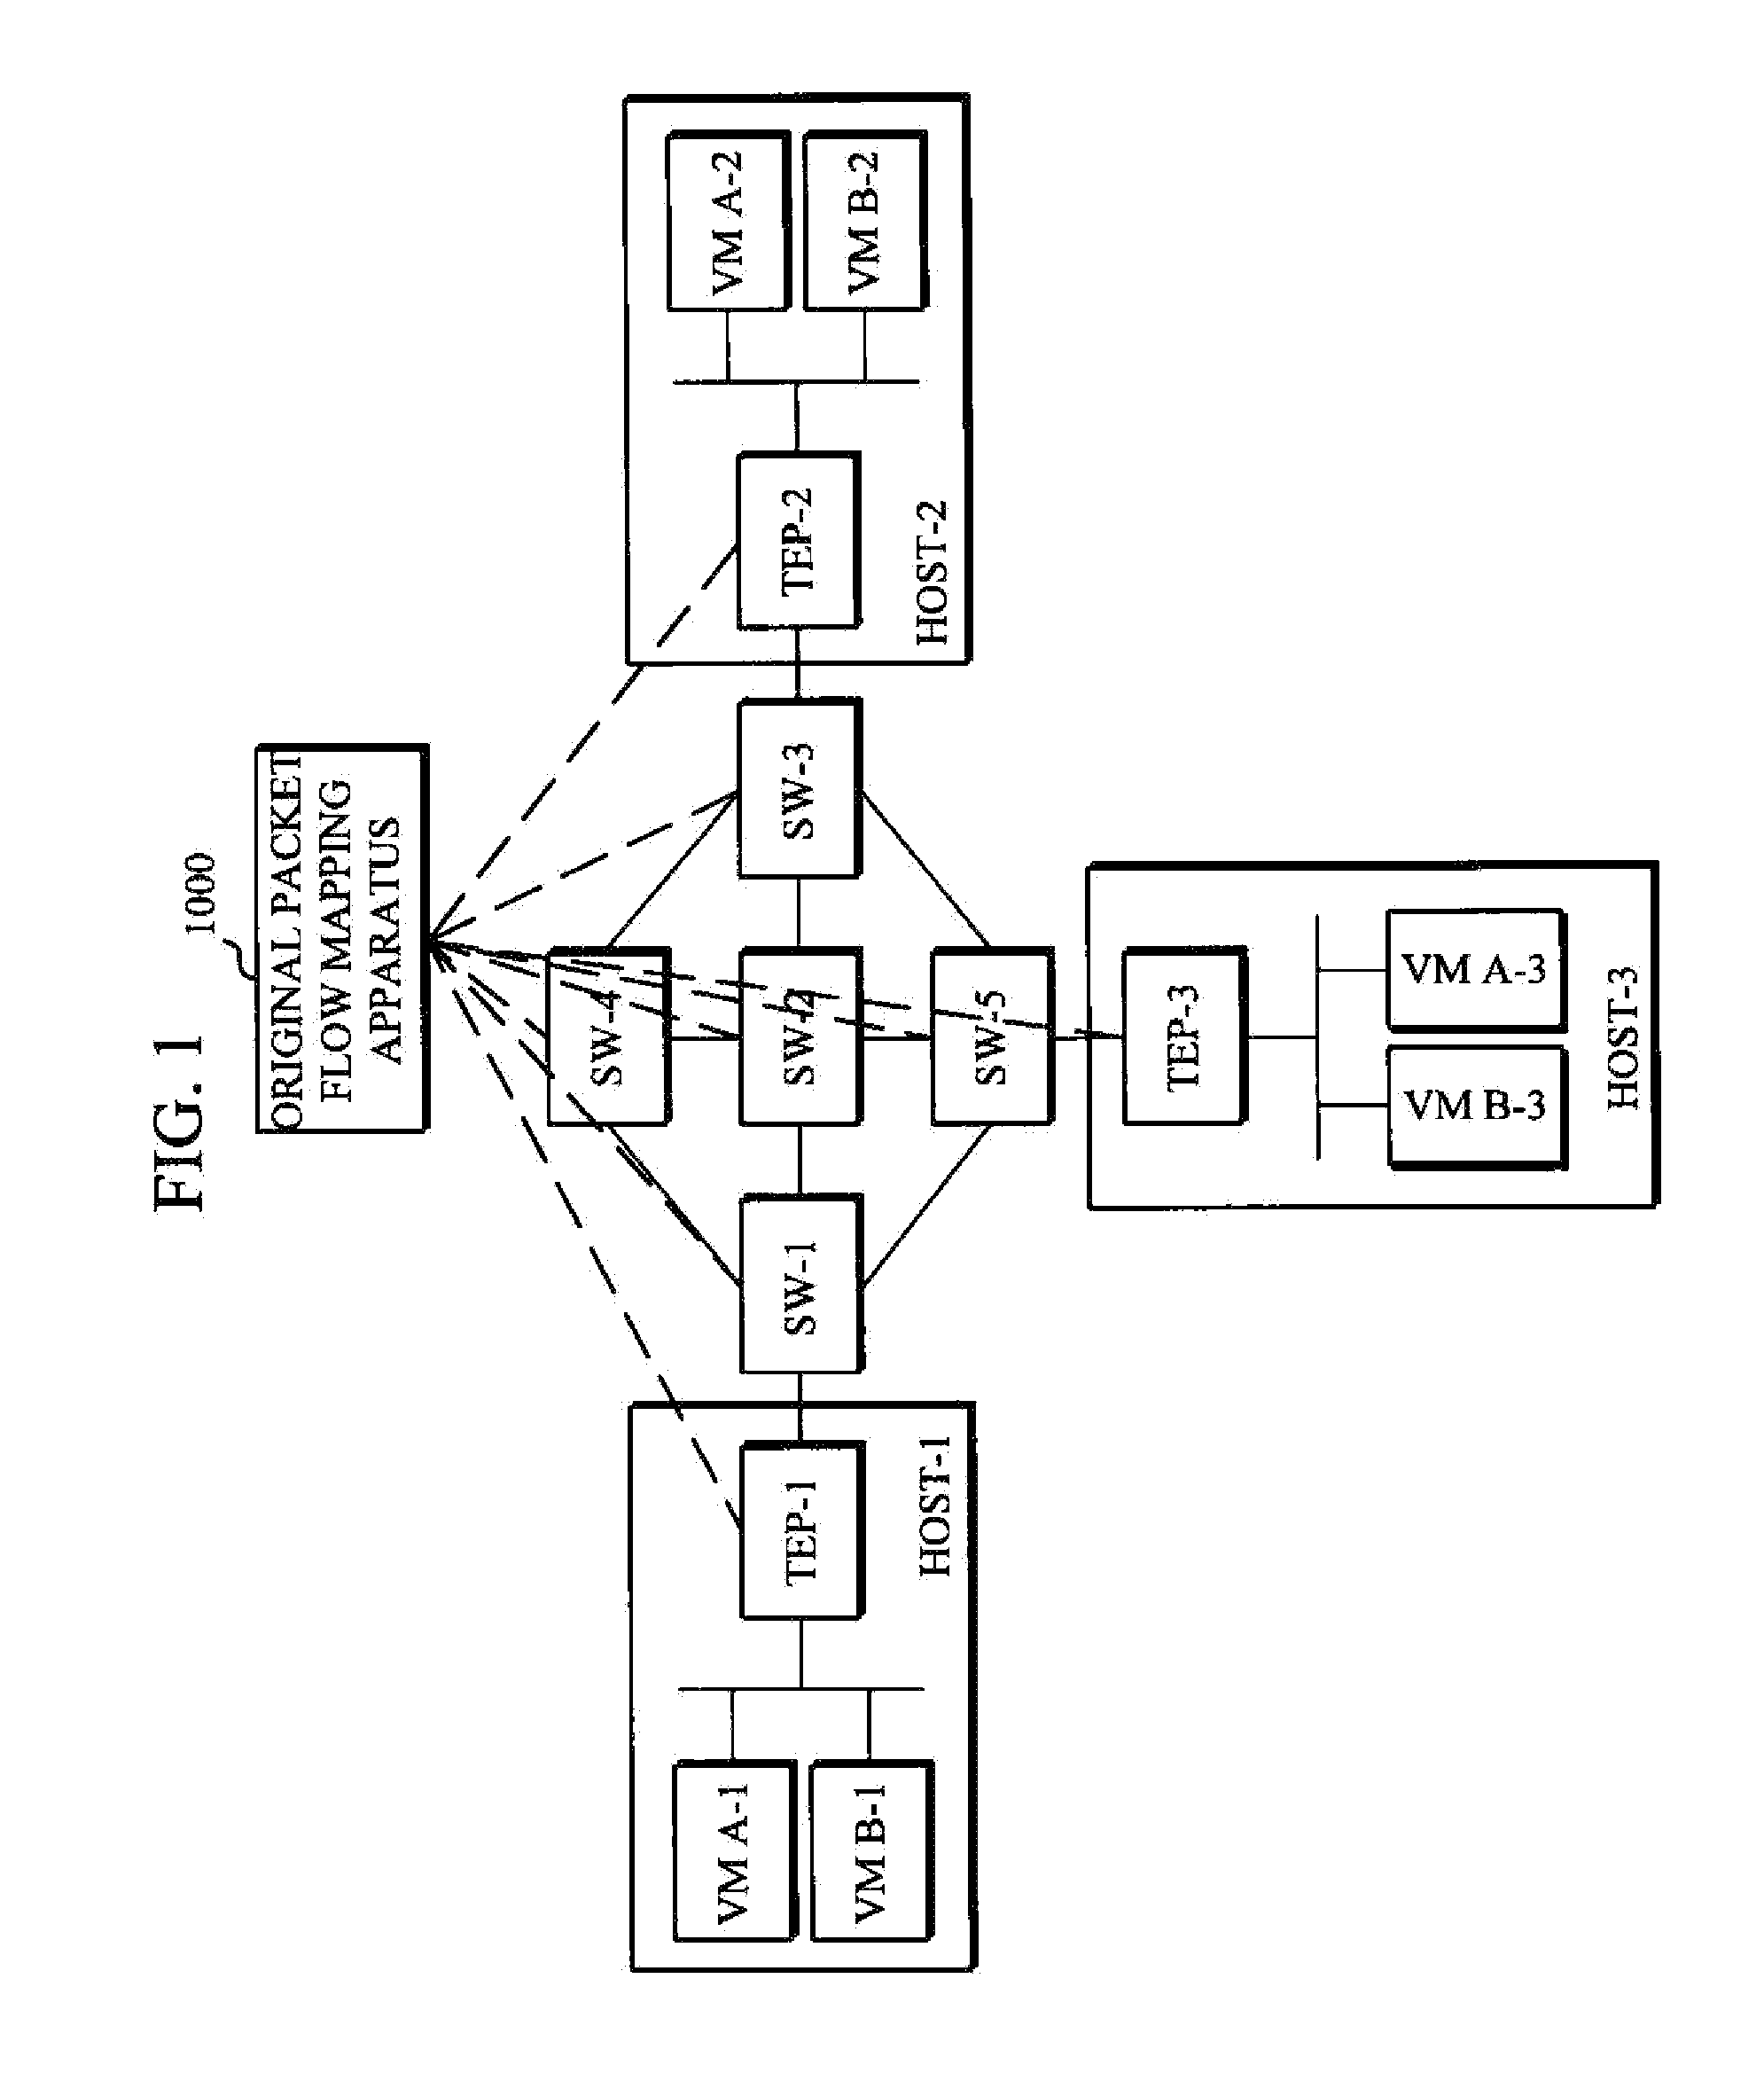 Overlay network-based original packet flow mapping apparatus and method therefor